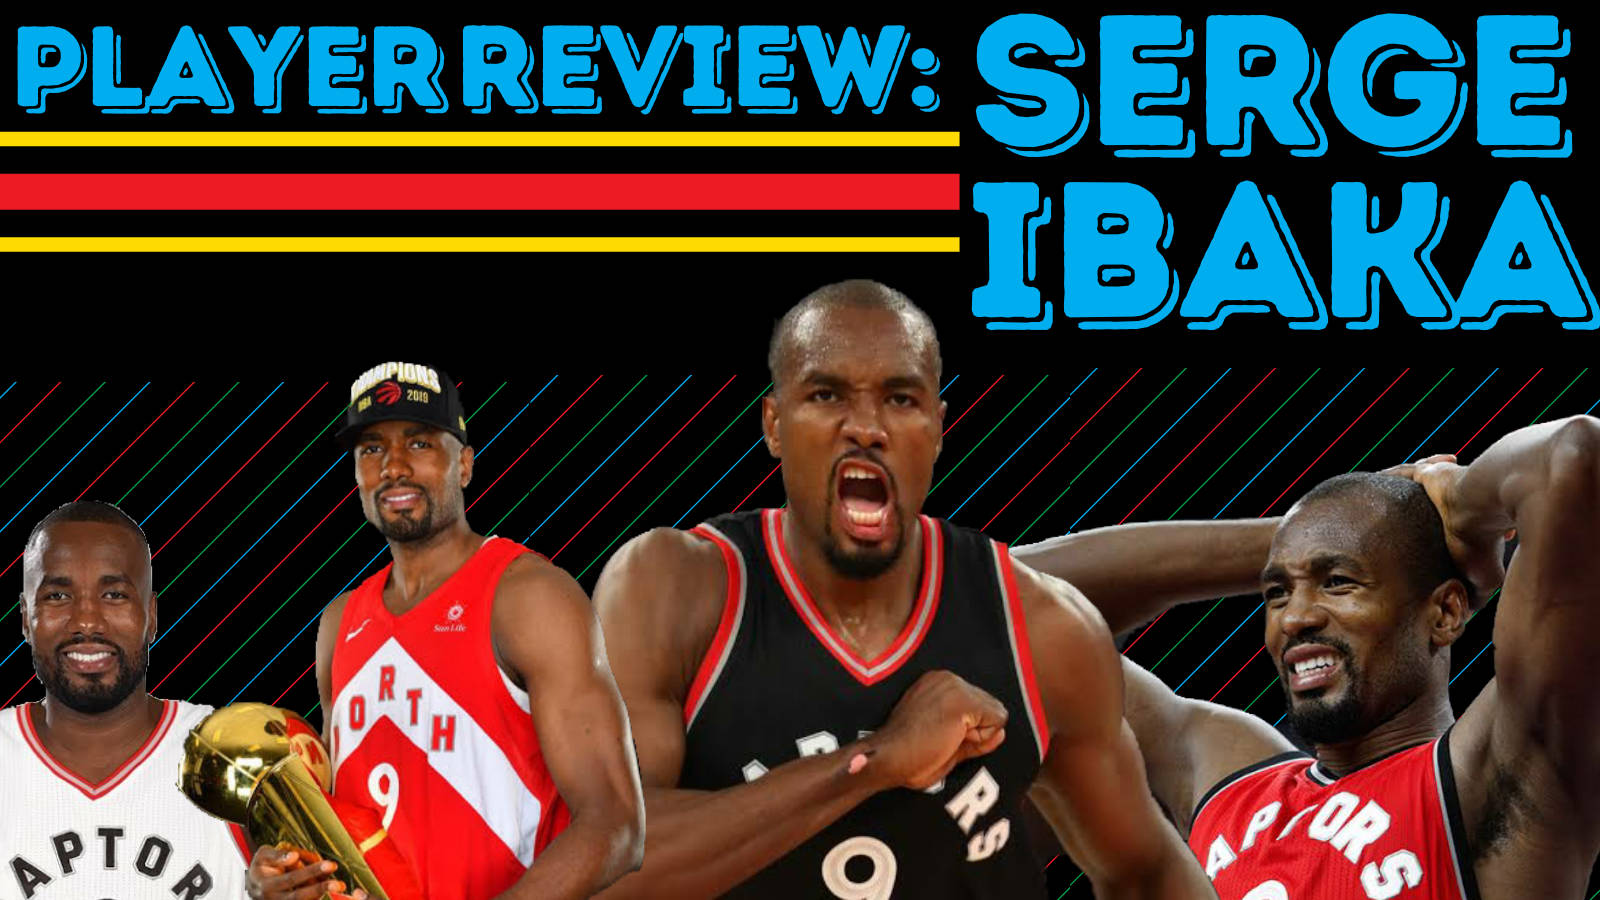 Serge Ibaka Different Colored Jersey Background